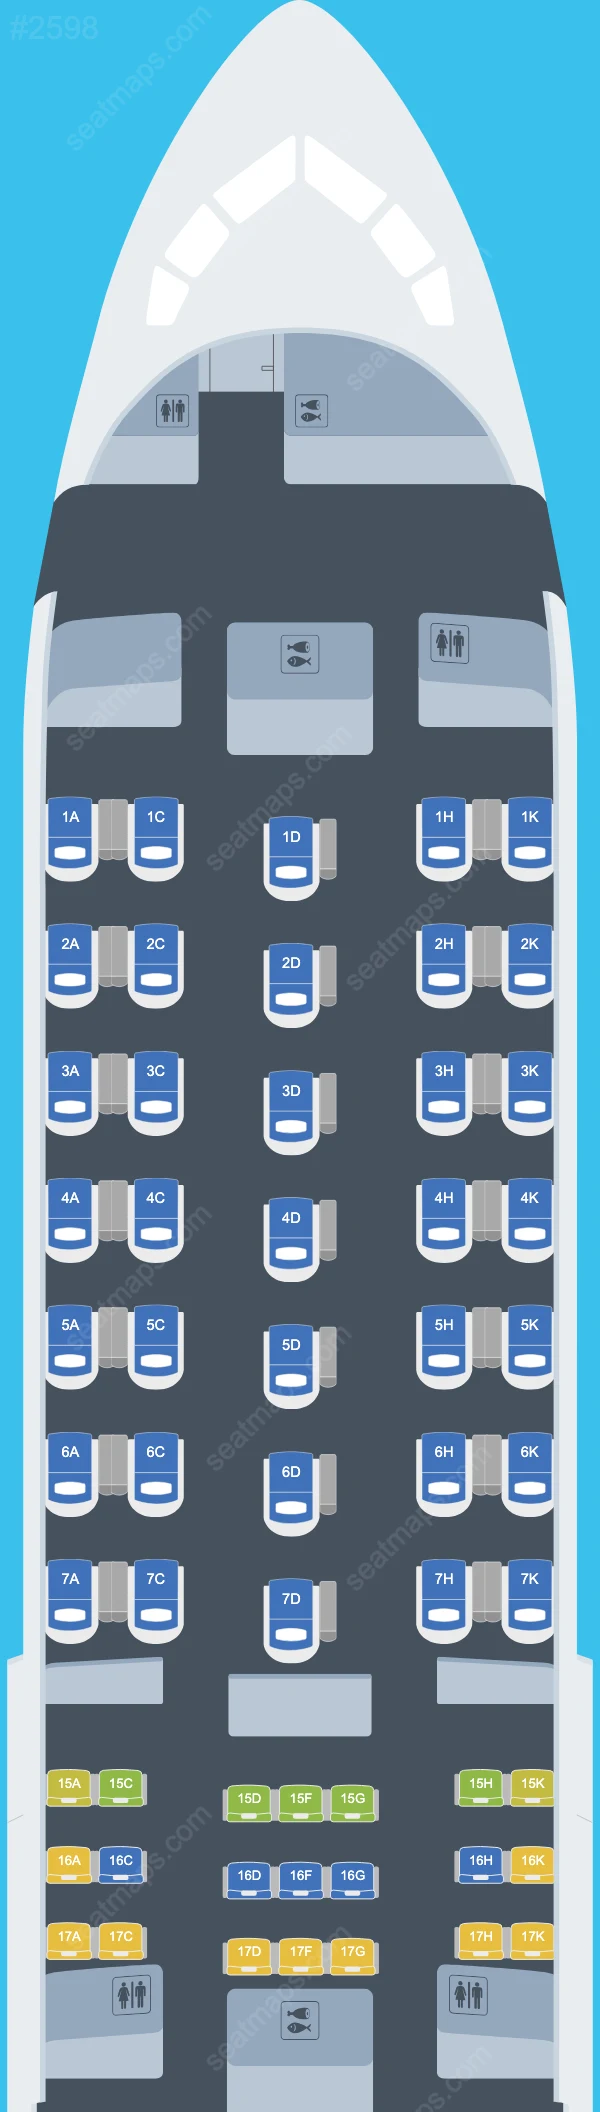 ANA (All Nippon Airways) Boeing 767-300 ER V.2 seatmap mobile preview